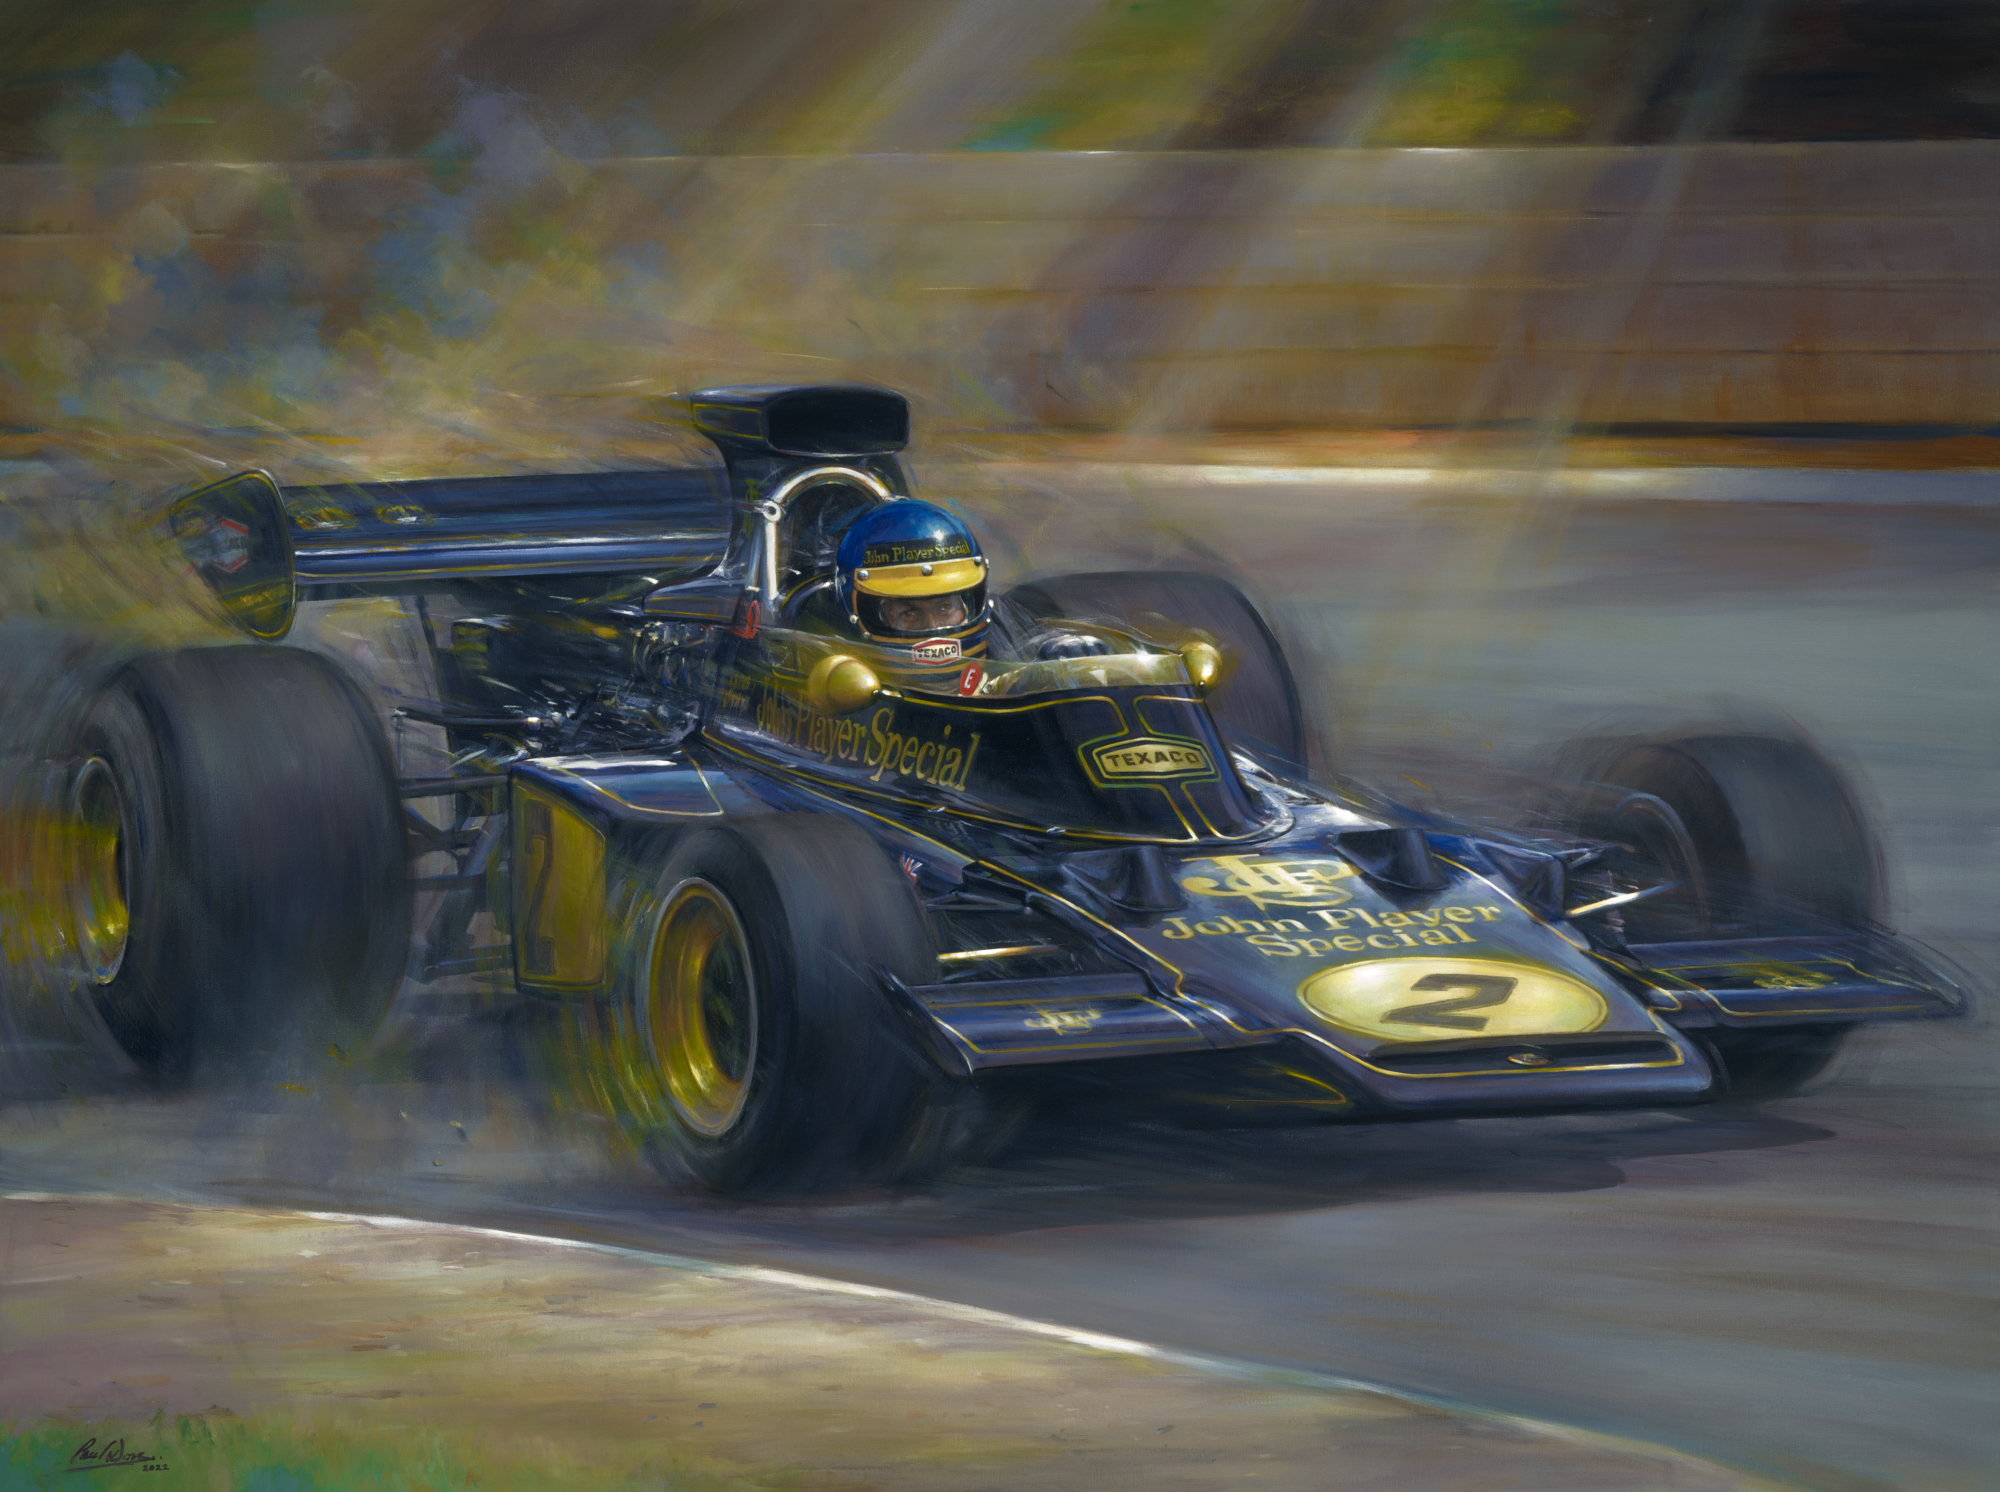 ronnie peterson in his lotus 72D